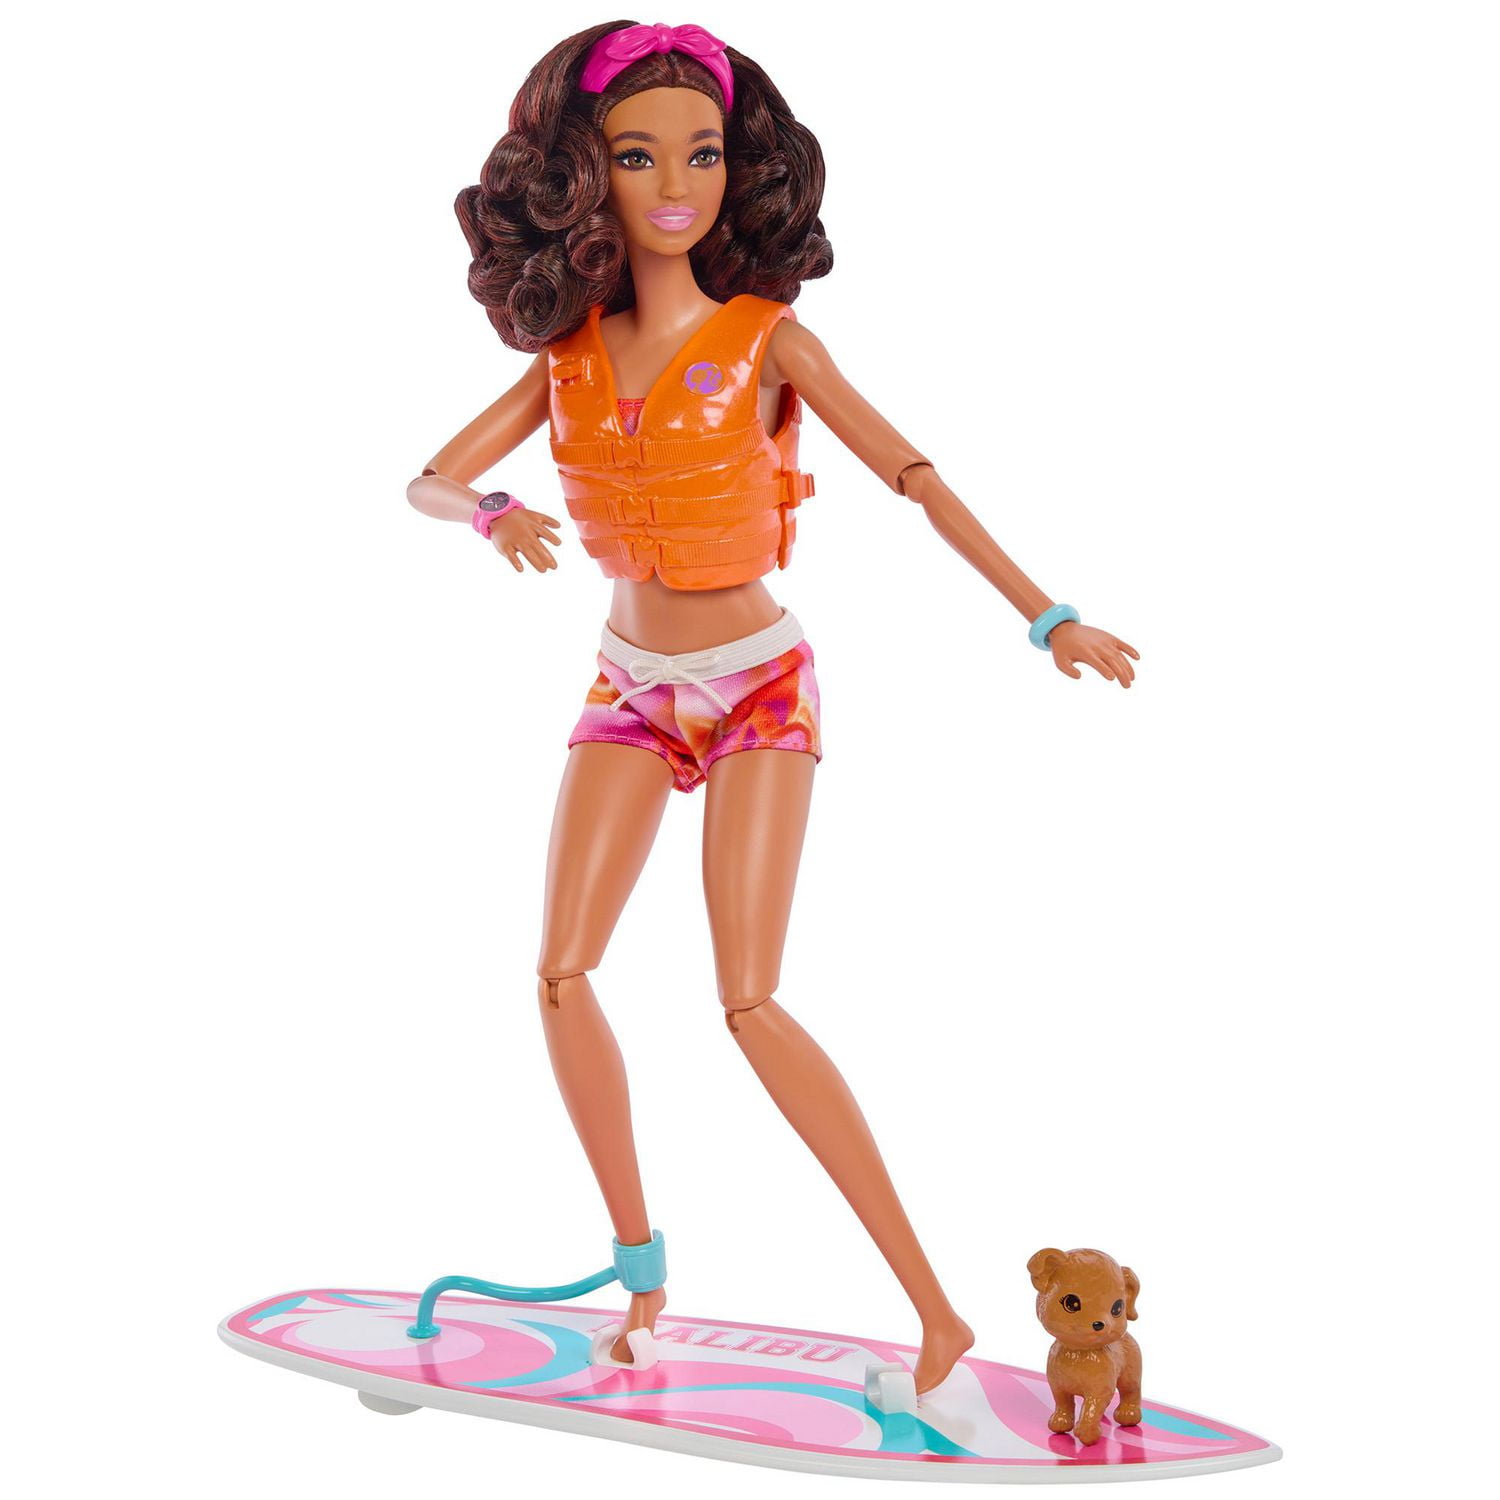 Barbie Doll with Surfboard and Puppy, Poseable Brunette Barbie